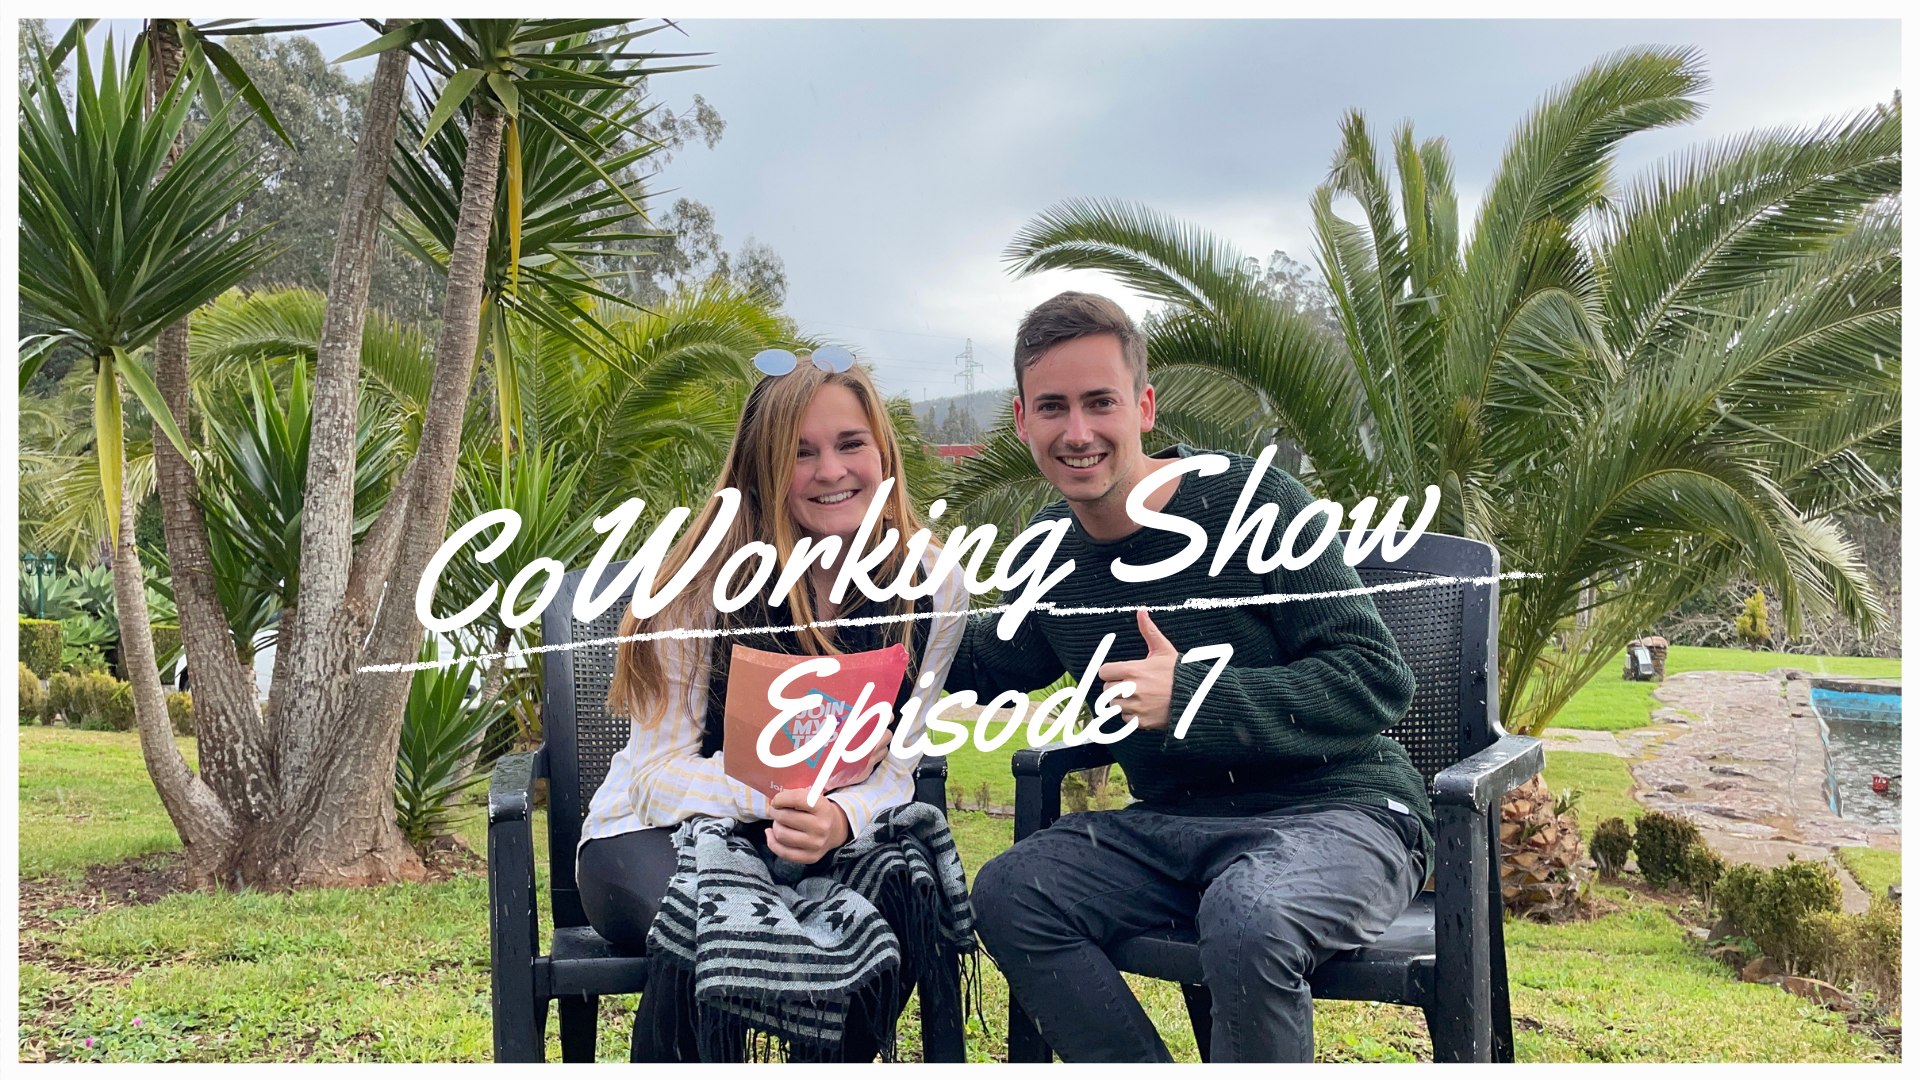 Remote Working Trip Activities | CoWorking Show